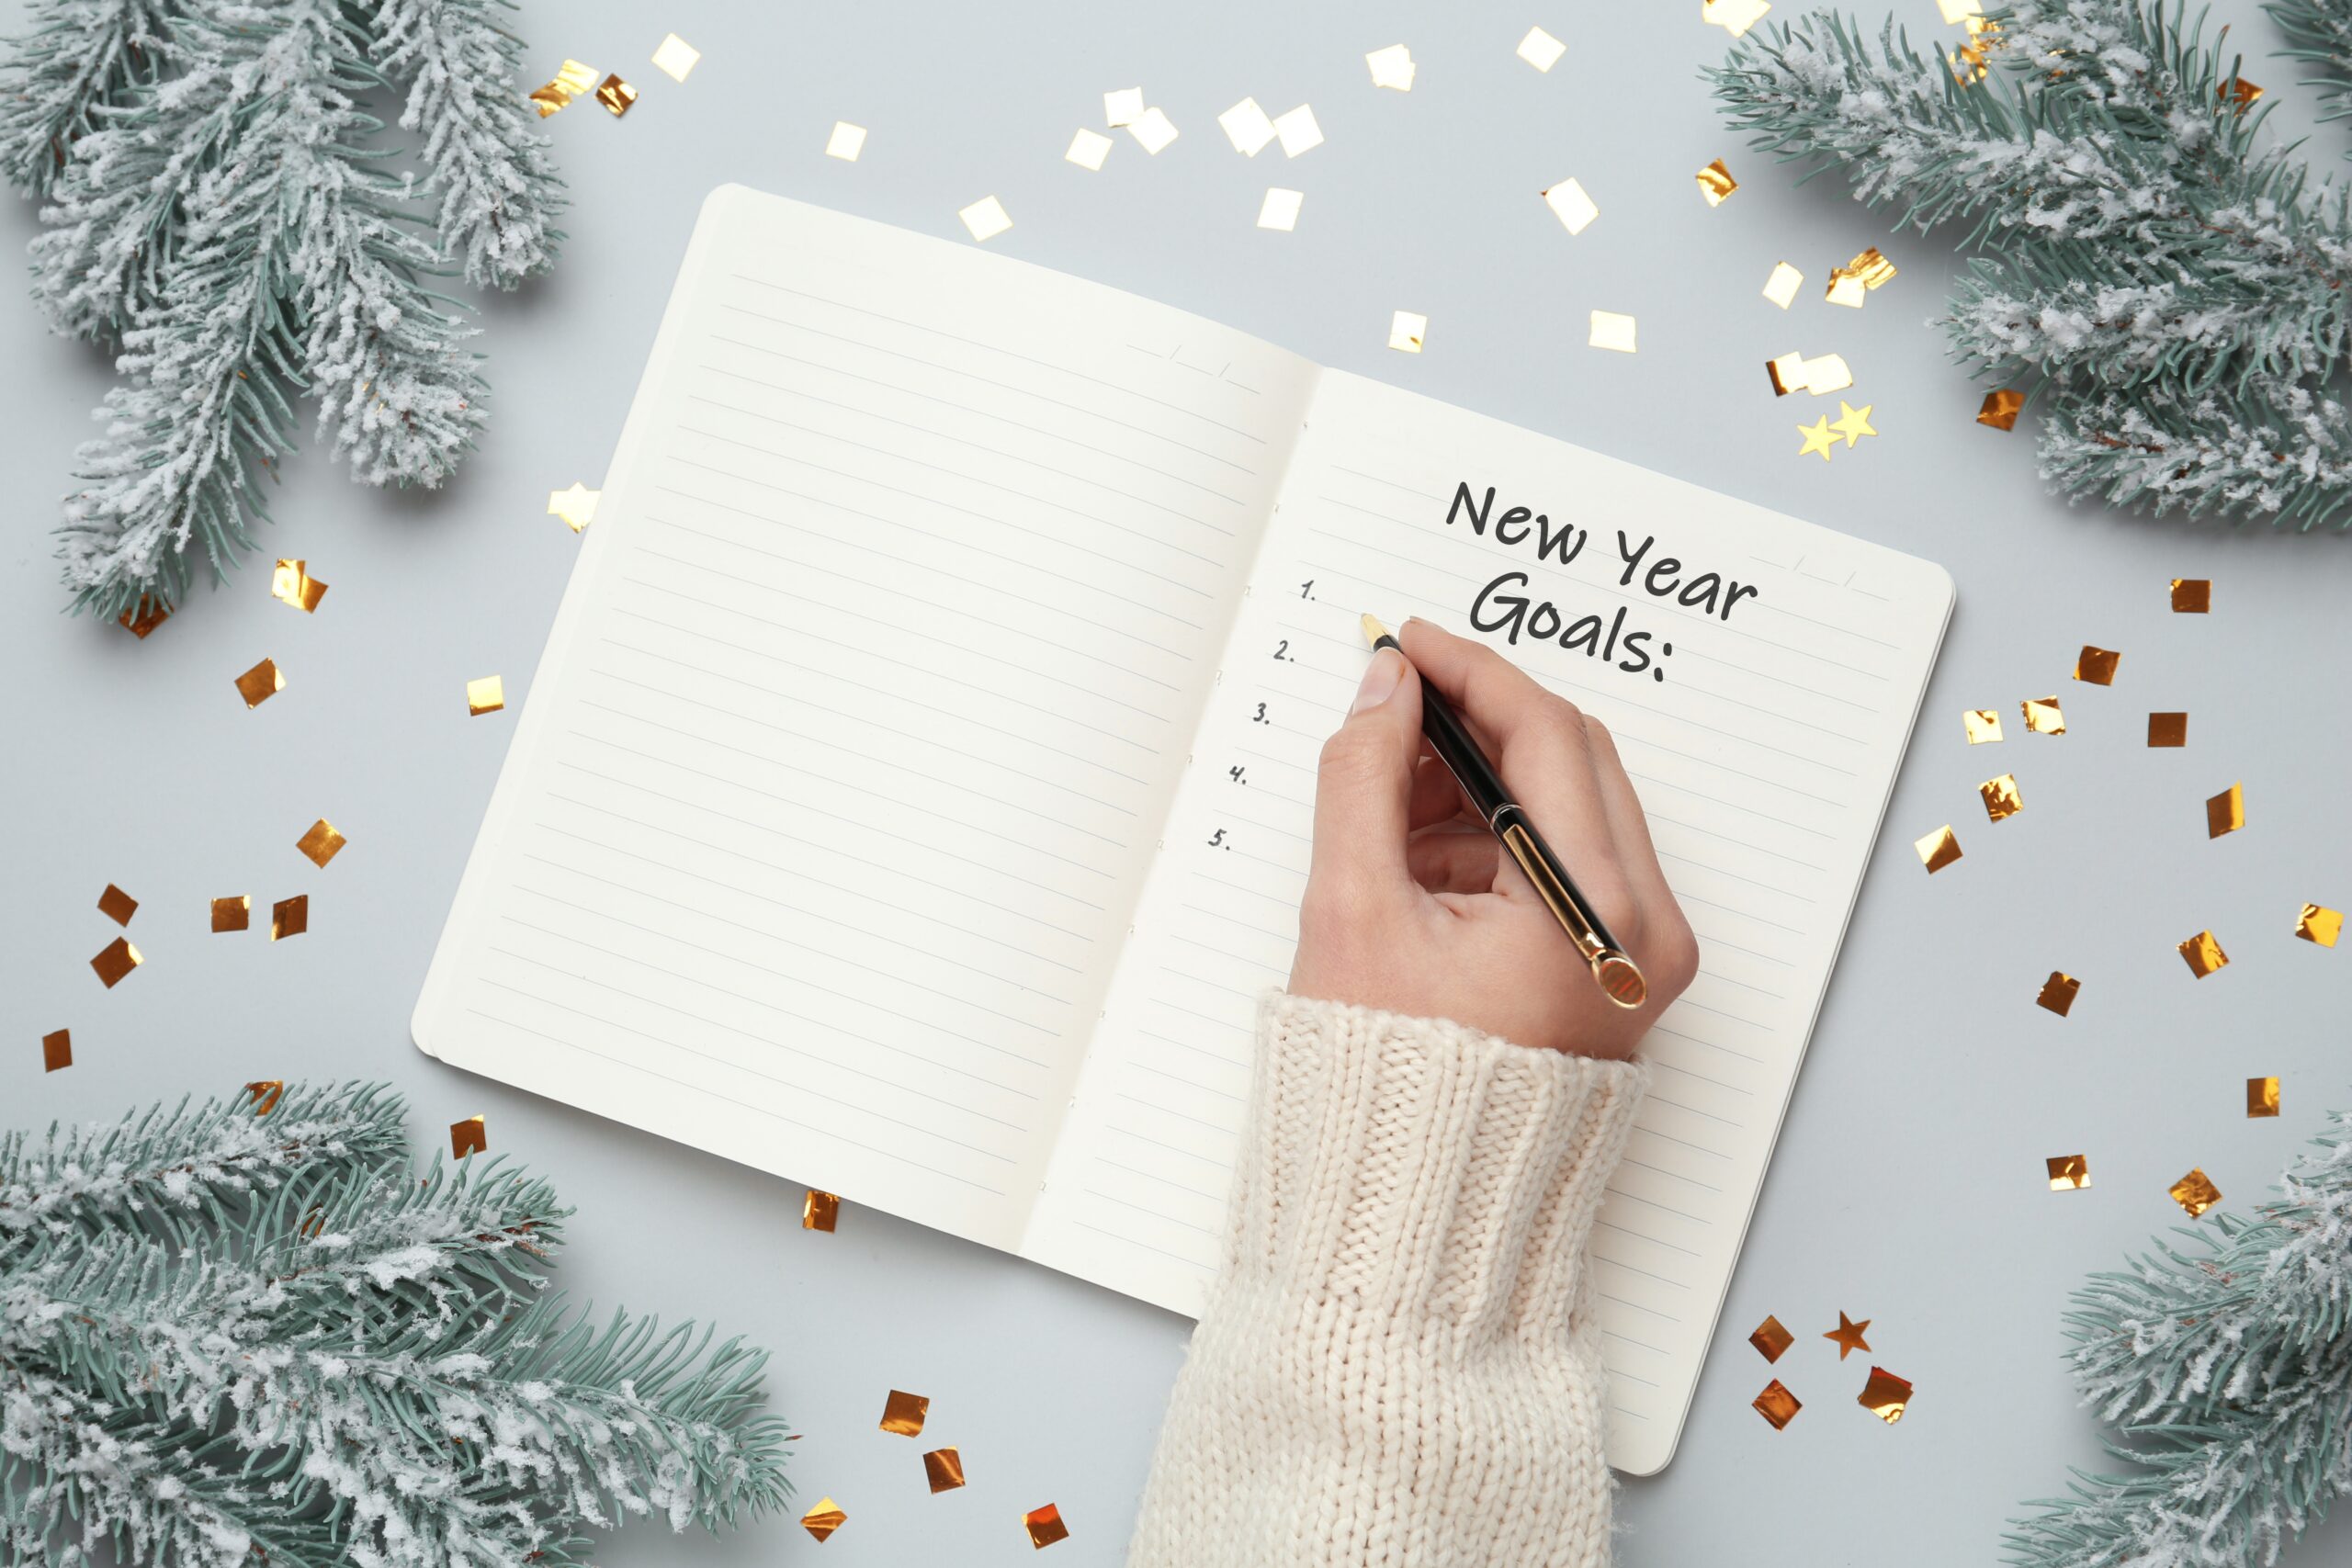 10 New Year's Resolutions and Goals to Inspire you